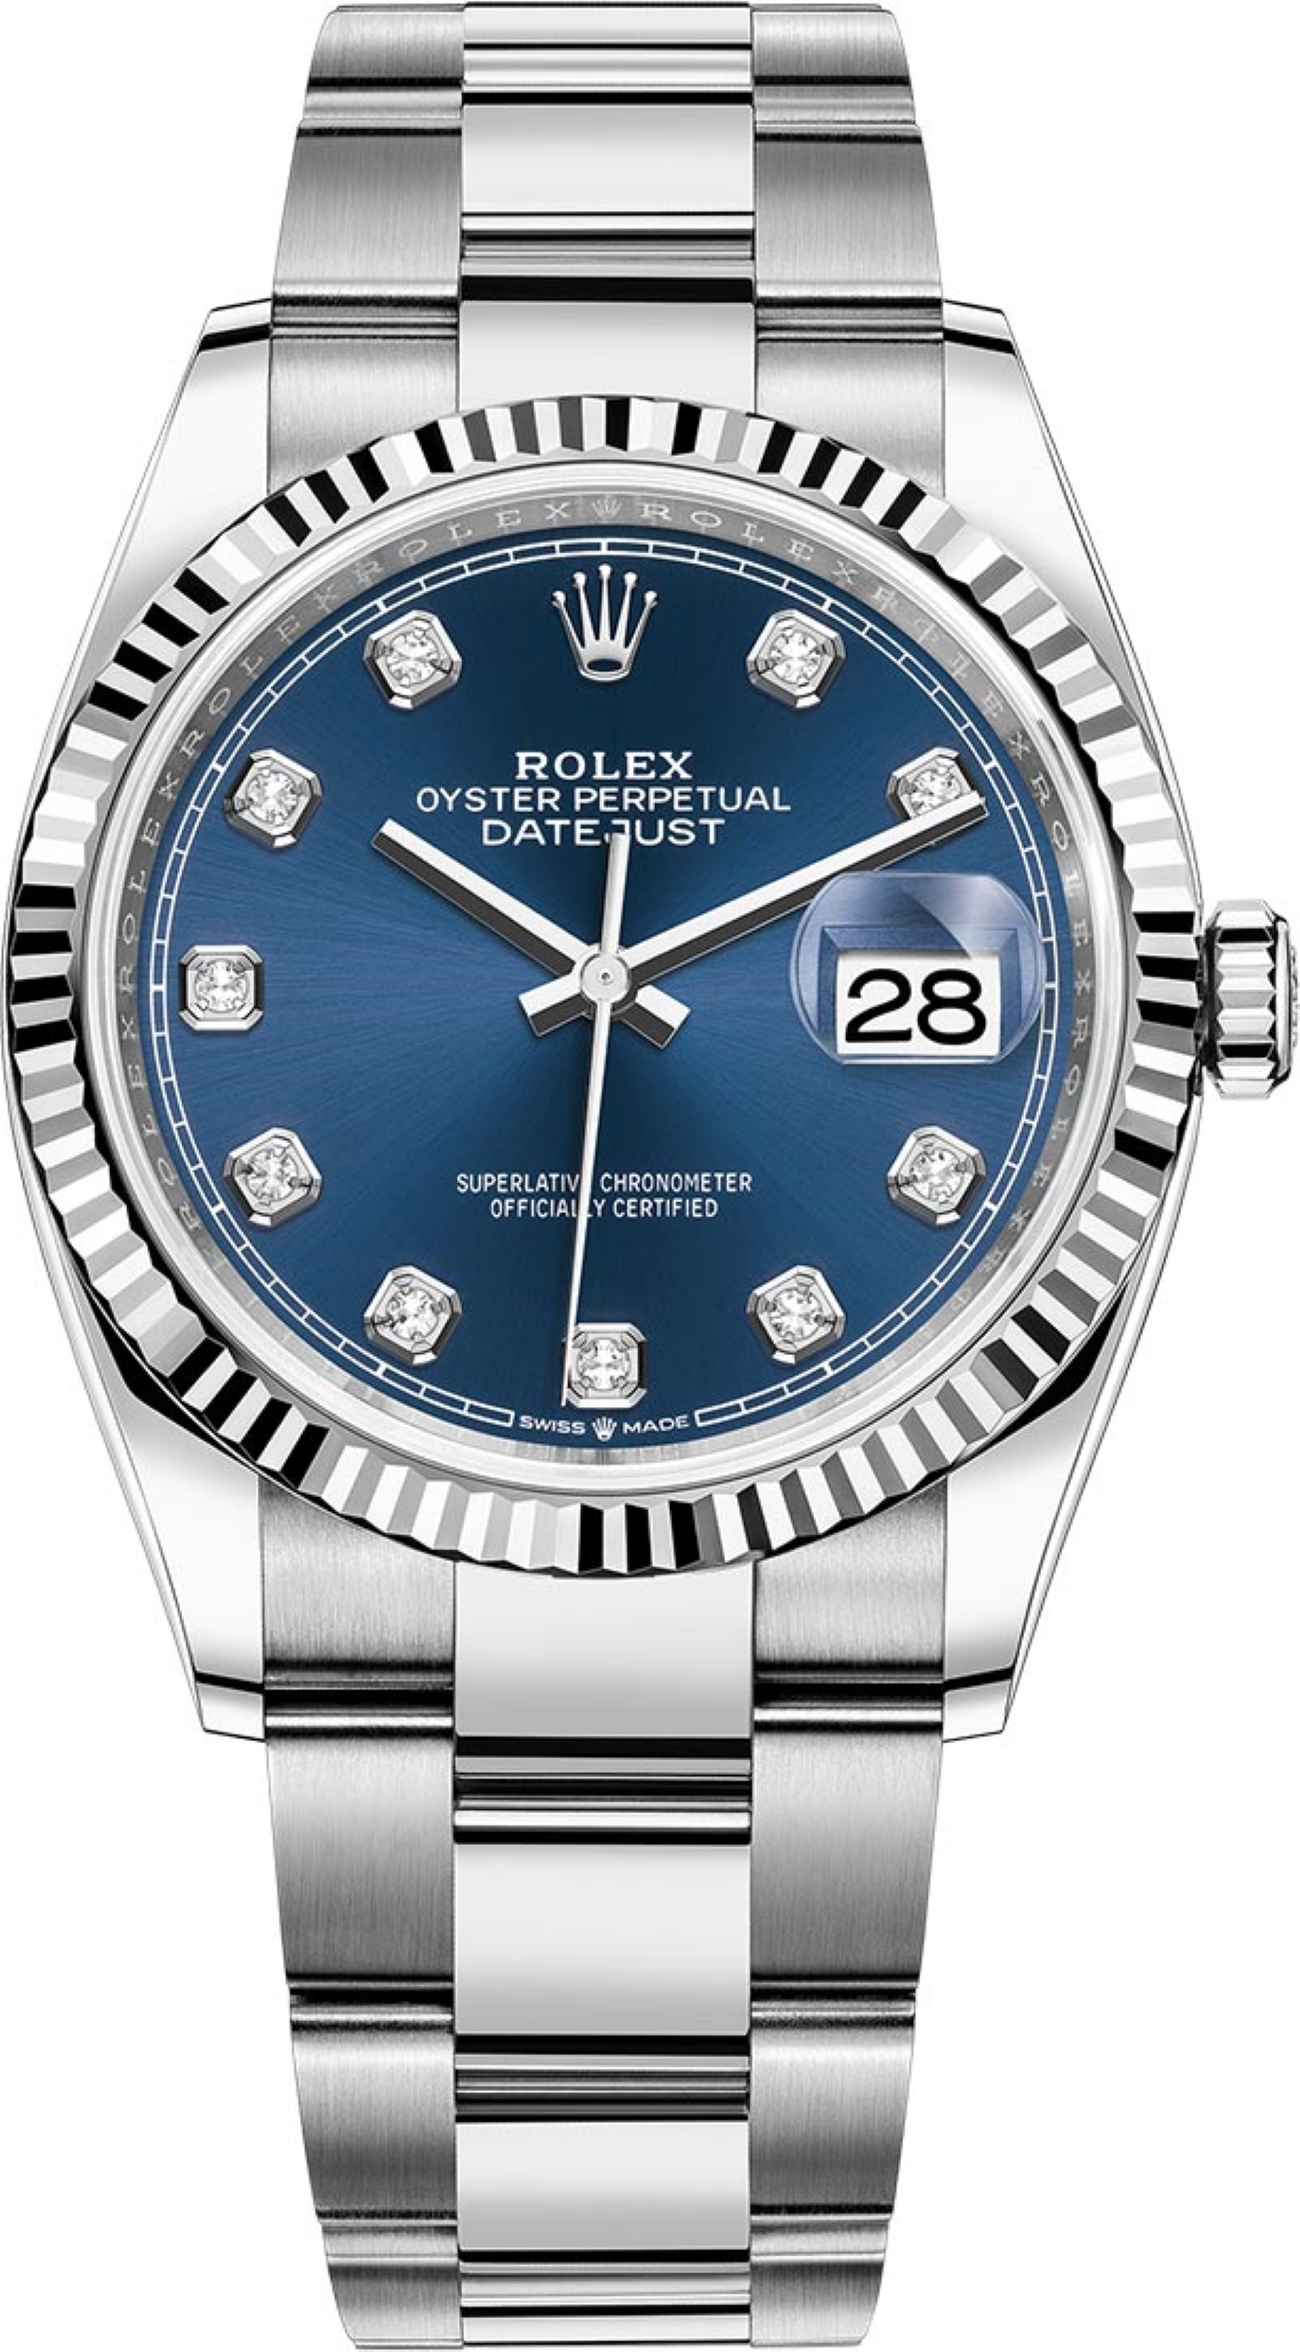 ROLEX DATEJUST 36 WHITE GOLD DIAMONDS BLUE DIAL OYSTER STEEL AUTOMATIC REF: 126234